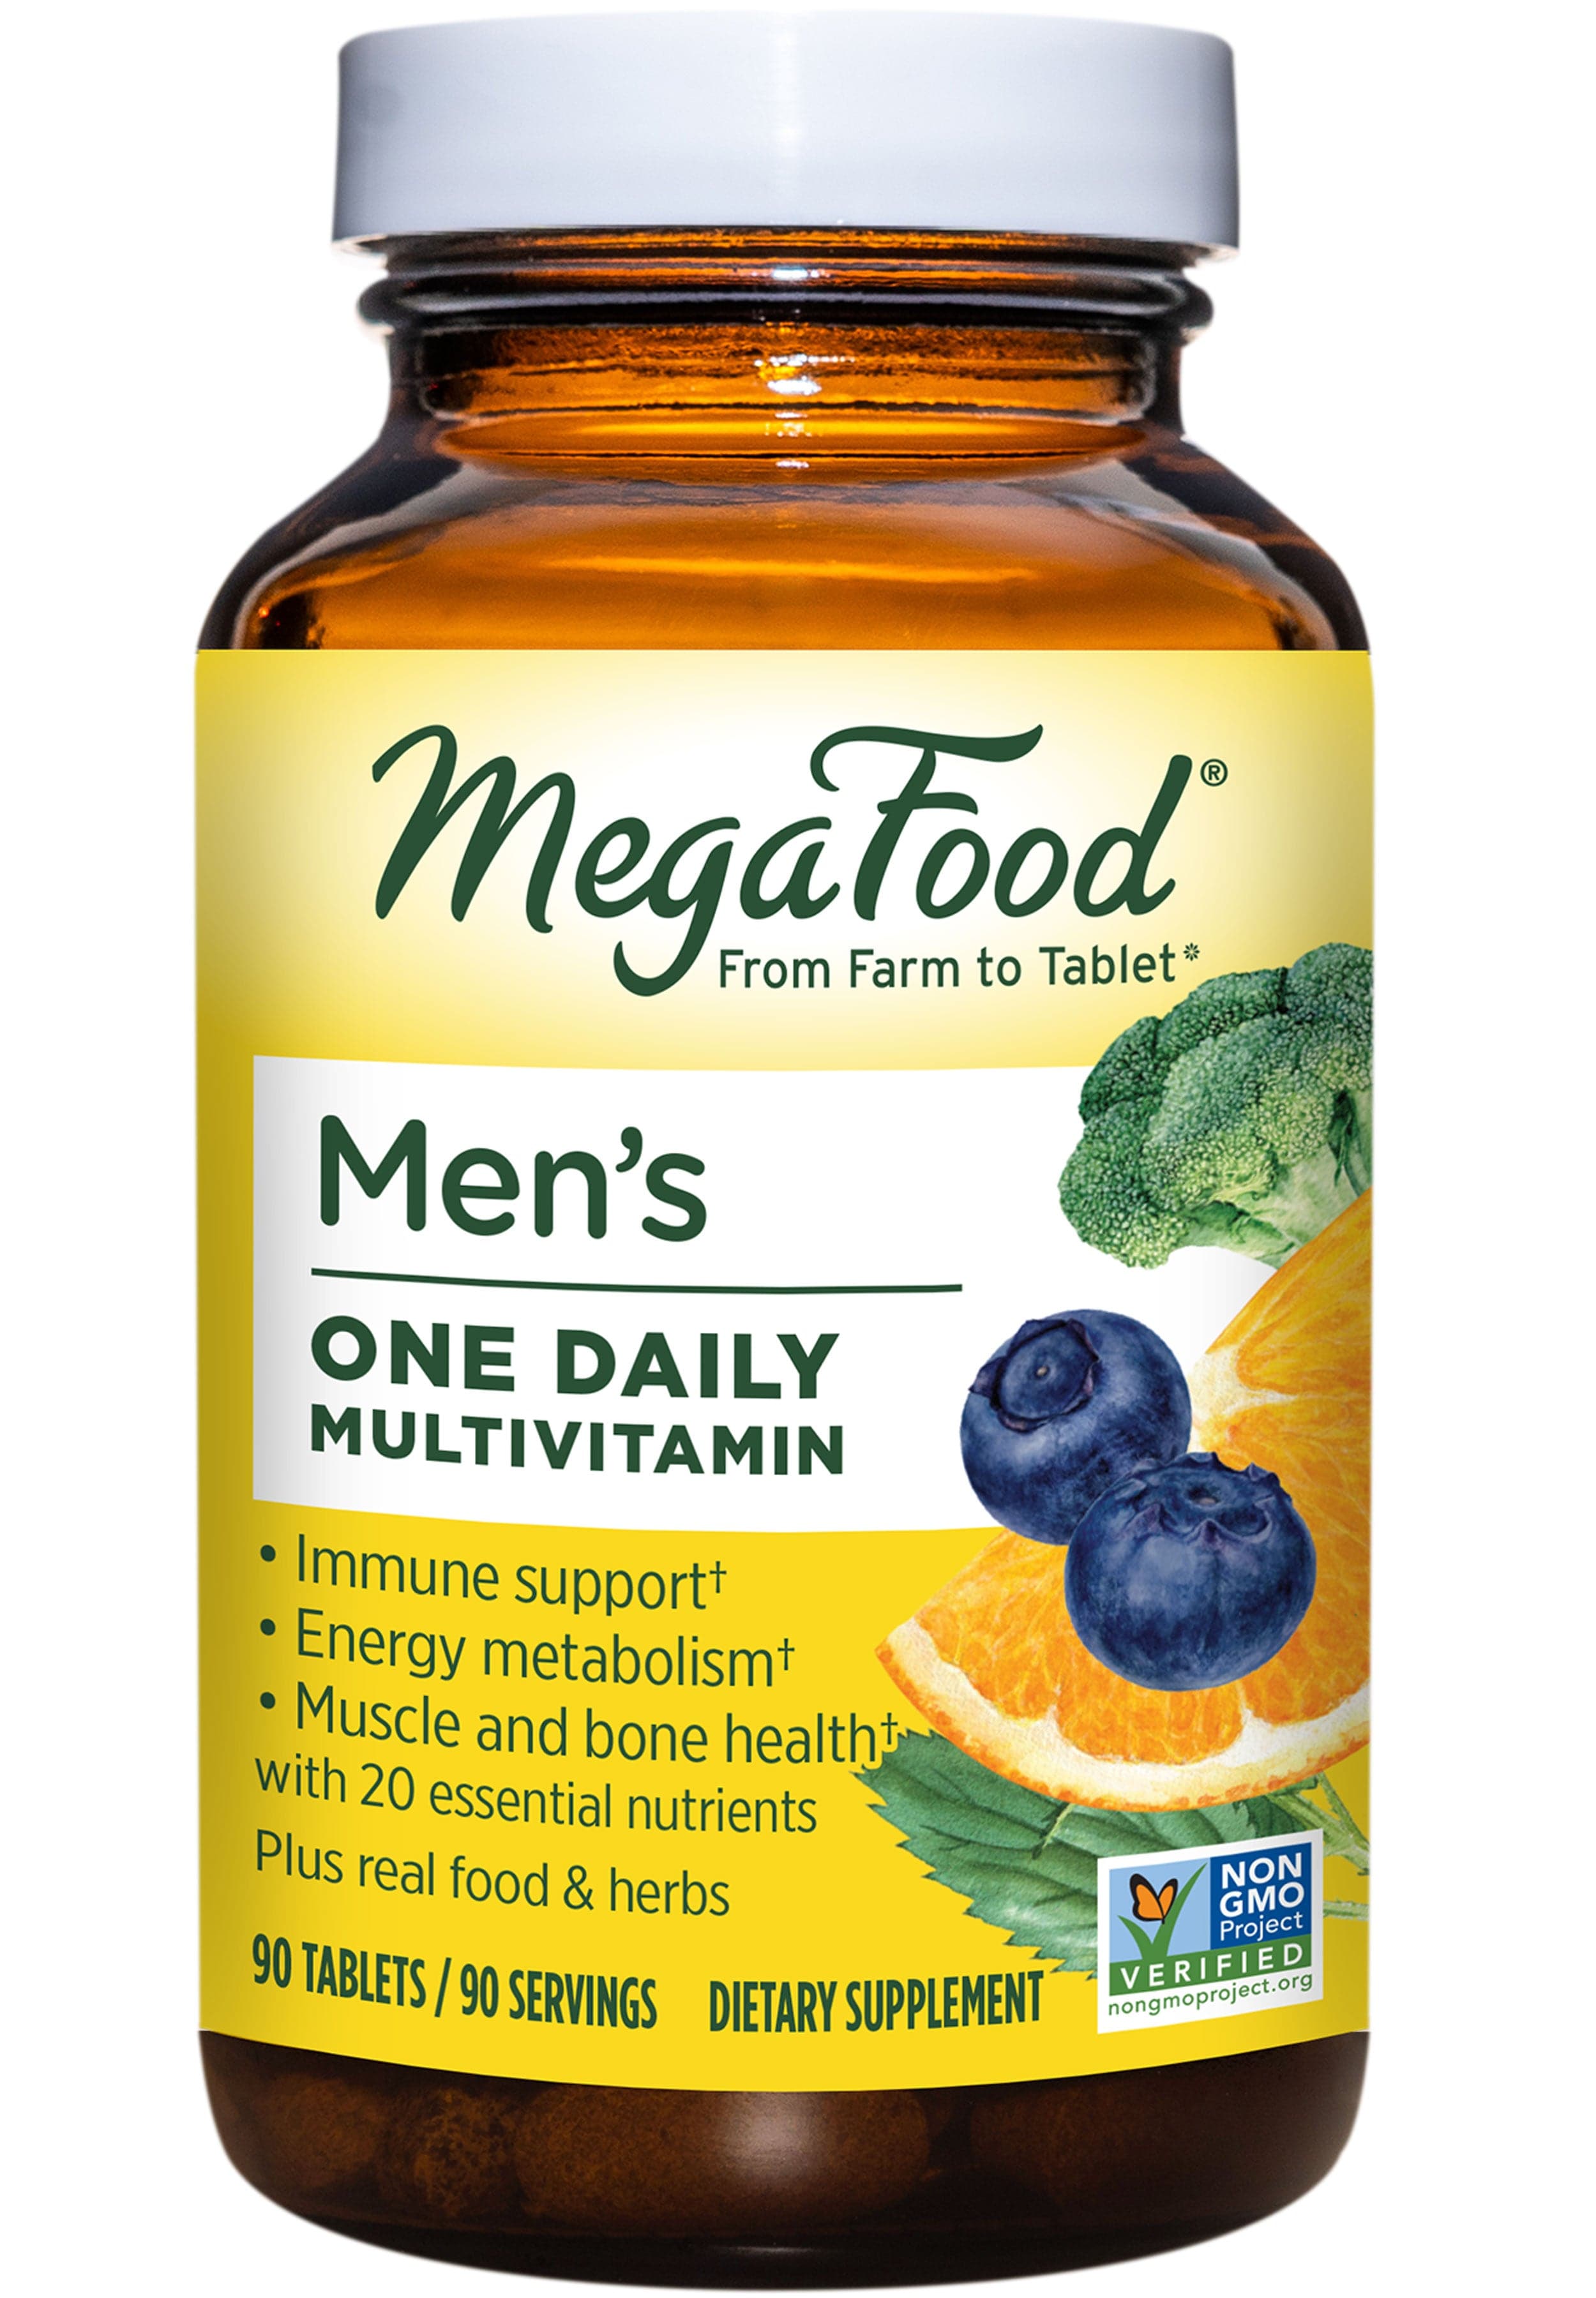 MegaFood Men’s One Daily Multivitamin